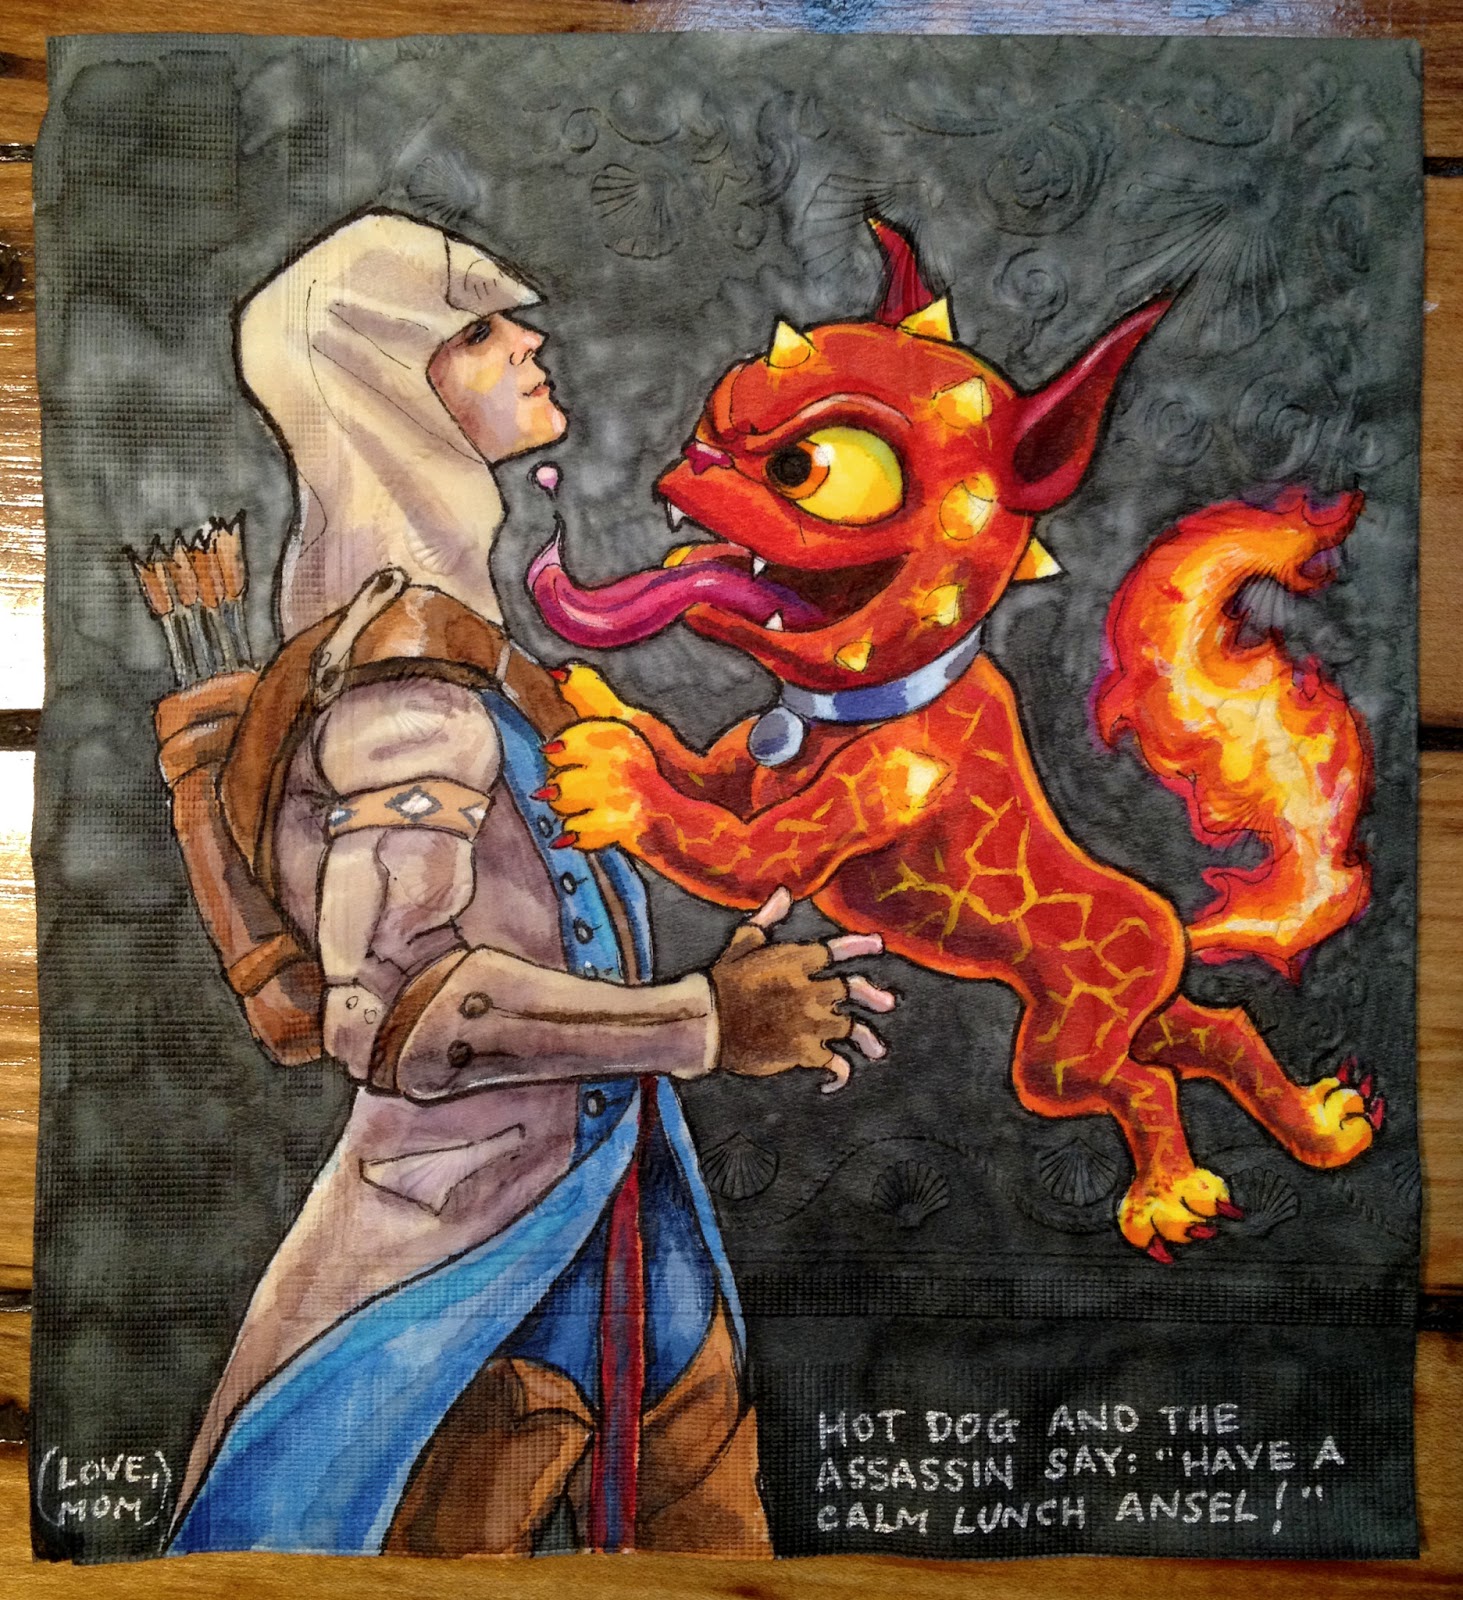 hot dog skylander drawing - Love Mom Hot Dog And The Assassin Say "Have Calm Lunch Ansel!